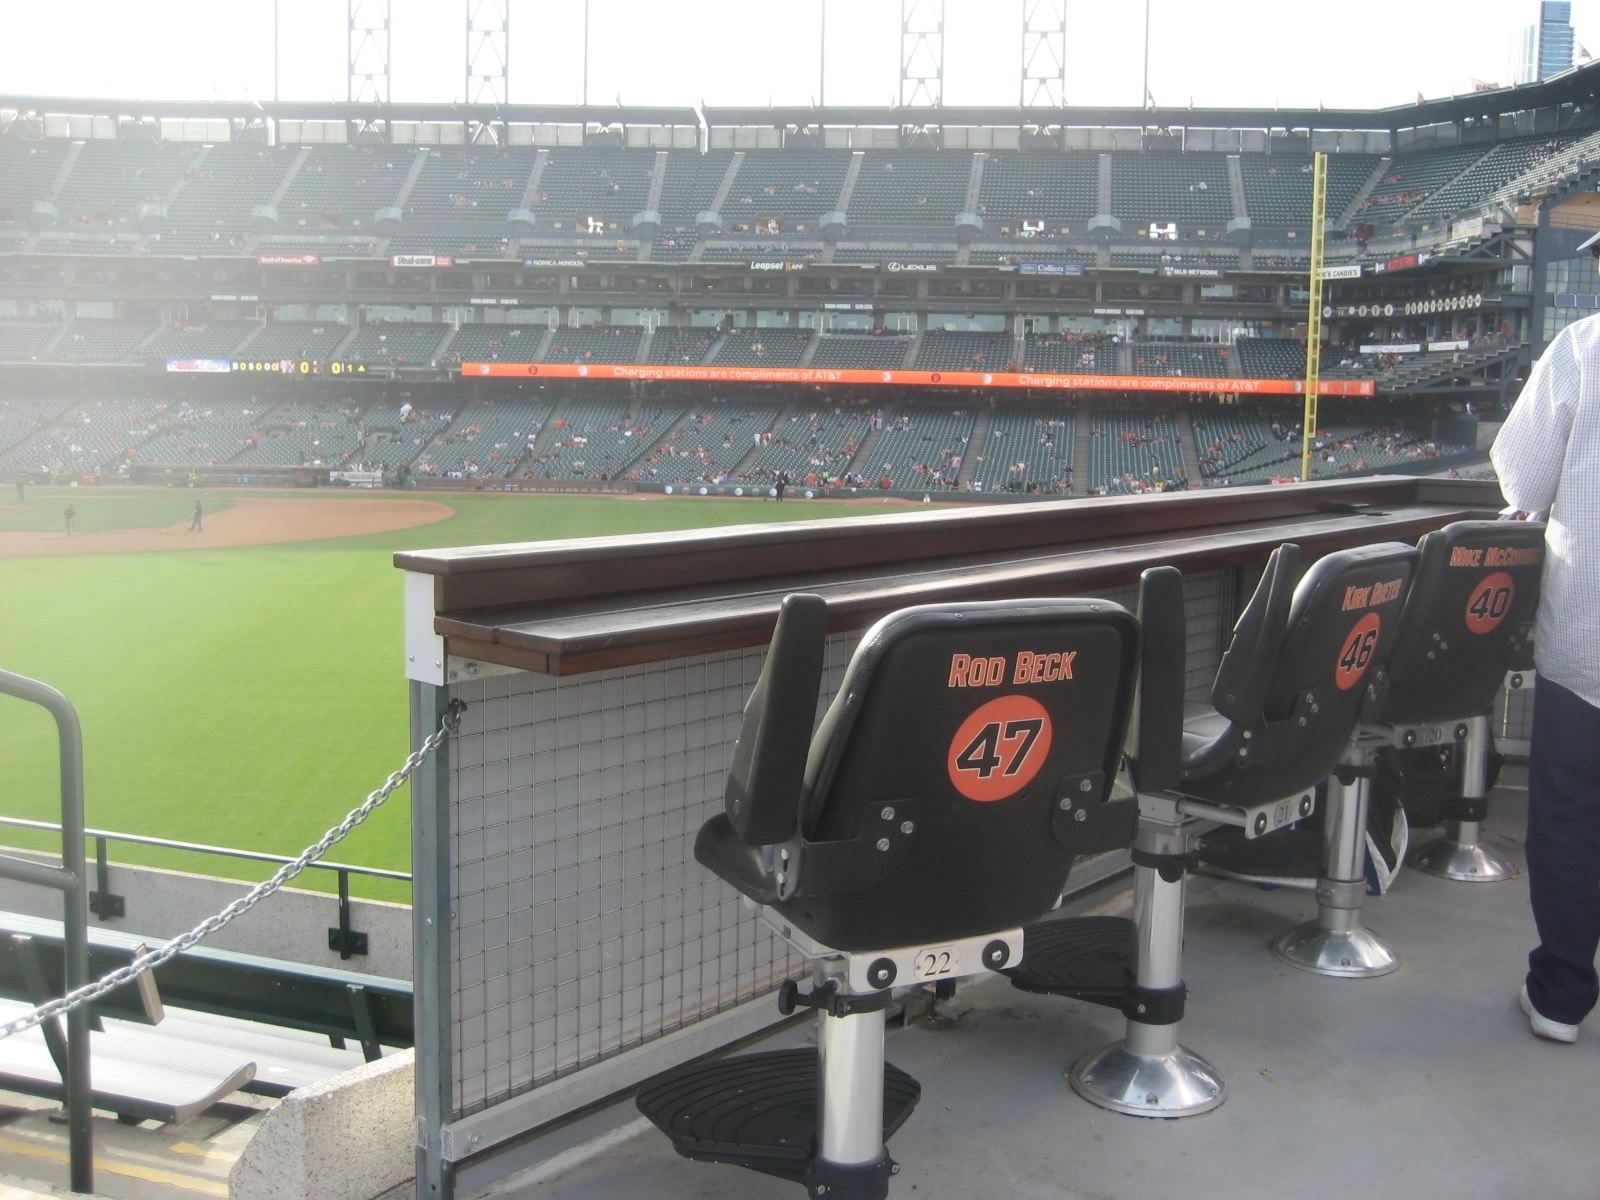 Seats adjacent to the bleachers in right center field